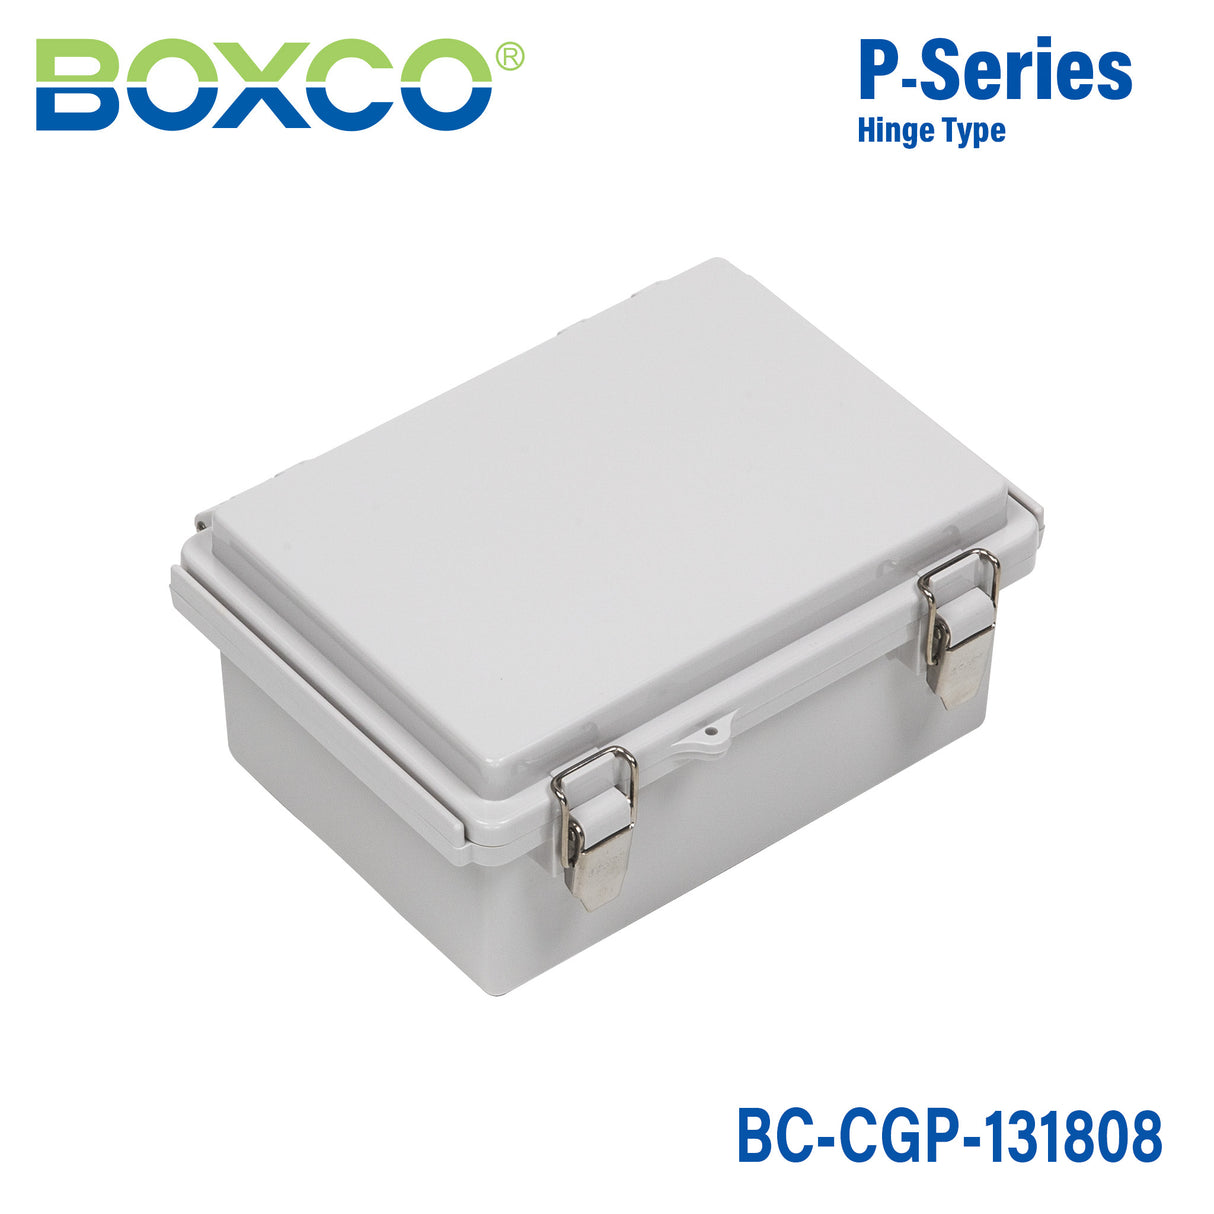 Boxco P-Series 135x185x85mm Plastic Enclosure, IP67, IK08, PC, Grey Cover, Molded Hinge and Latch Type